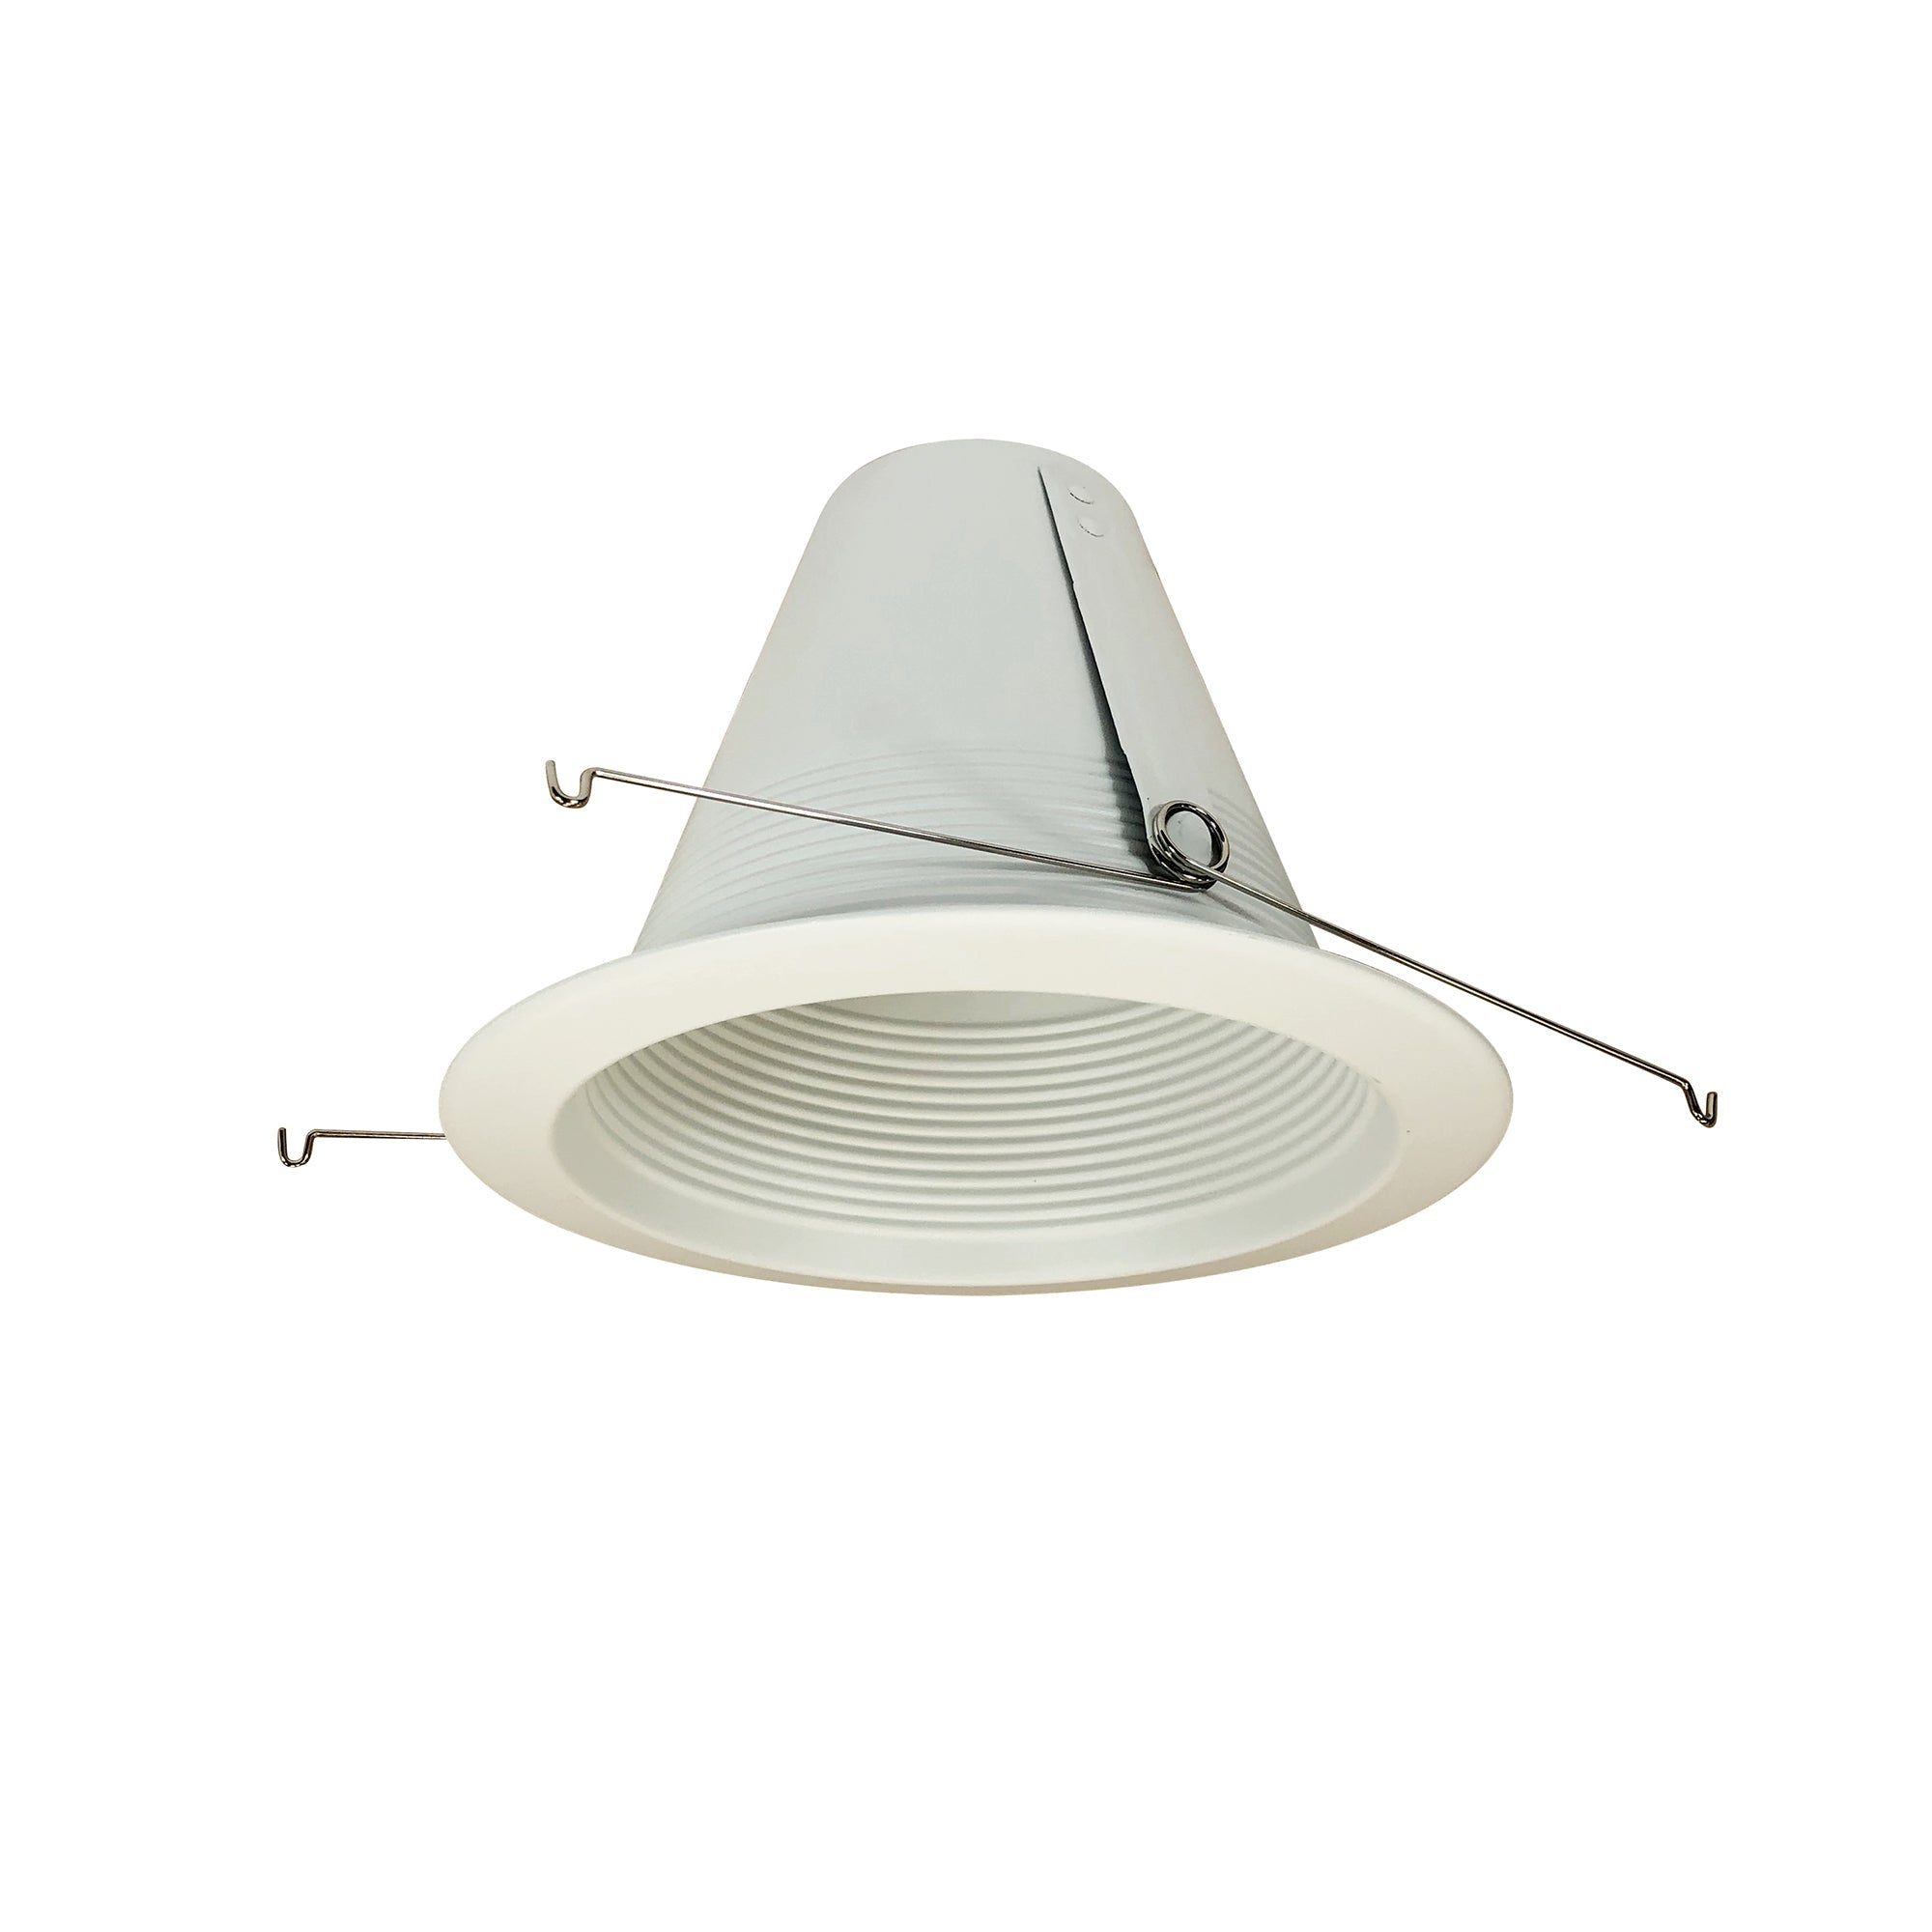 Nora Lighting NTM-713WAL - Recessed - 6 Inch Air-Tight Aluminum Baffle Cone w/ Flange, White